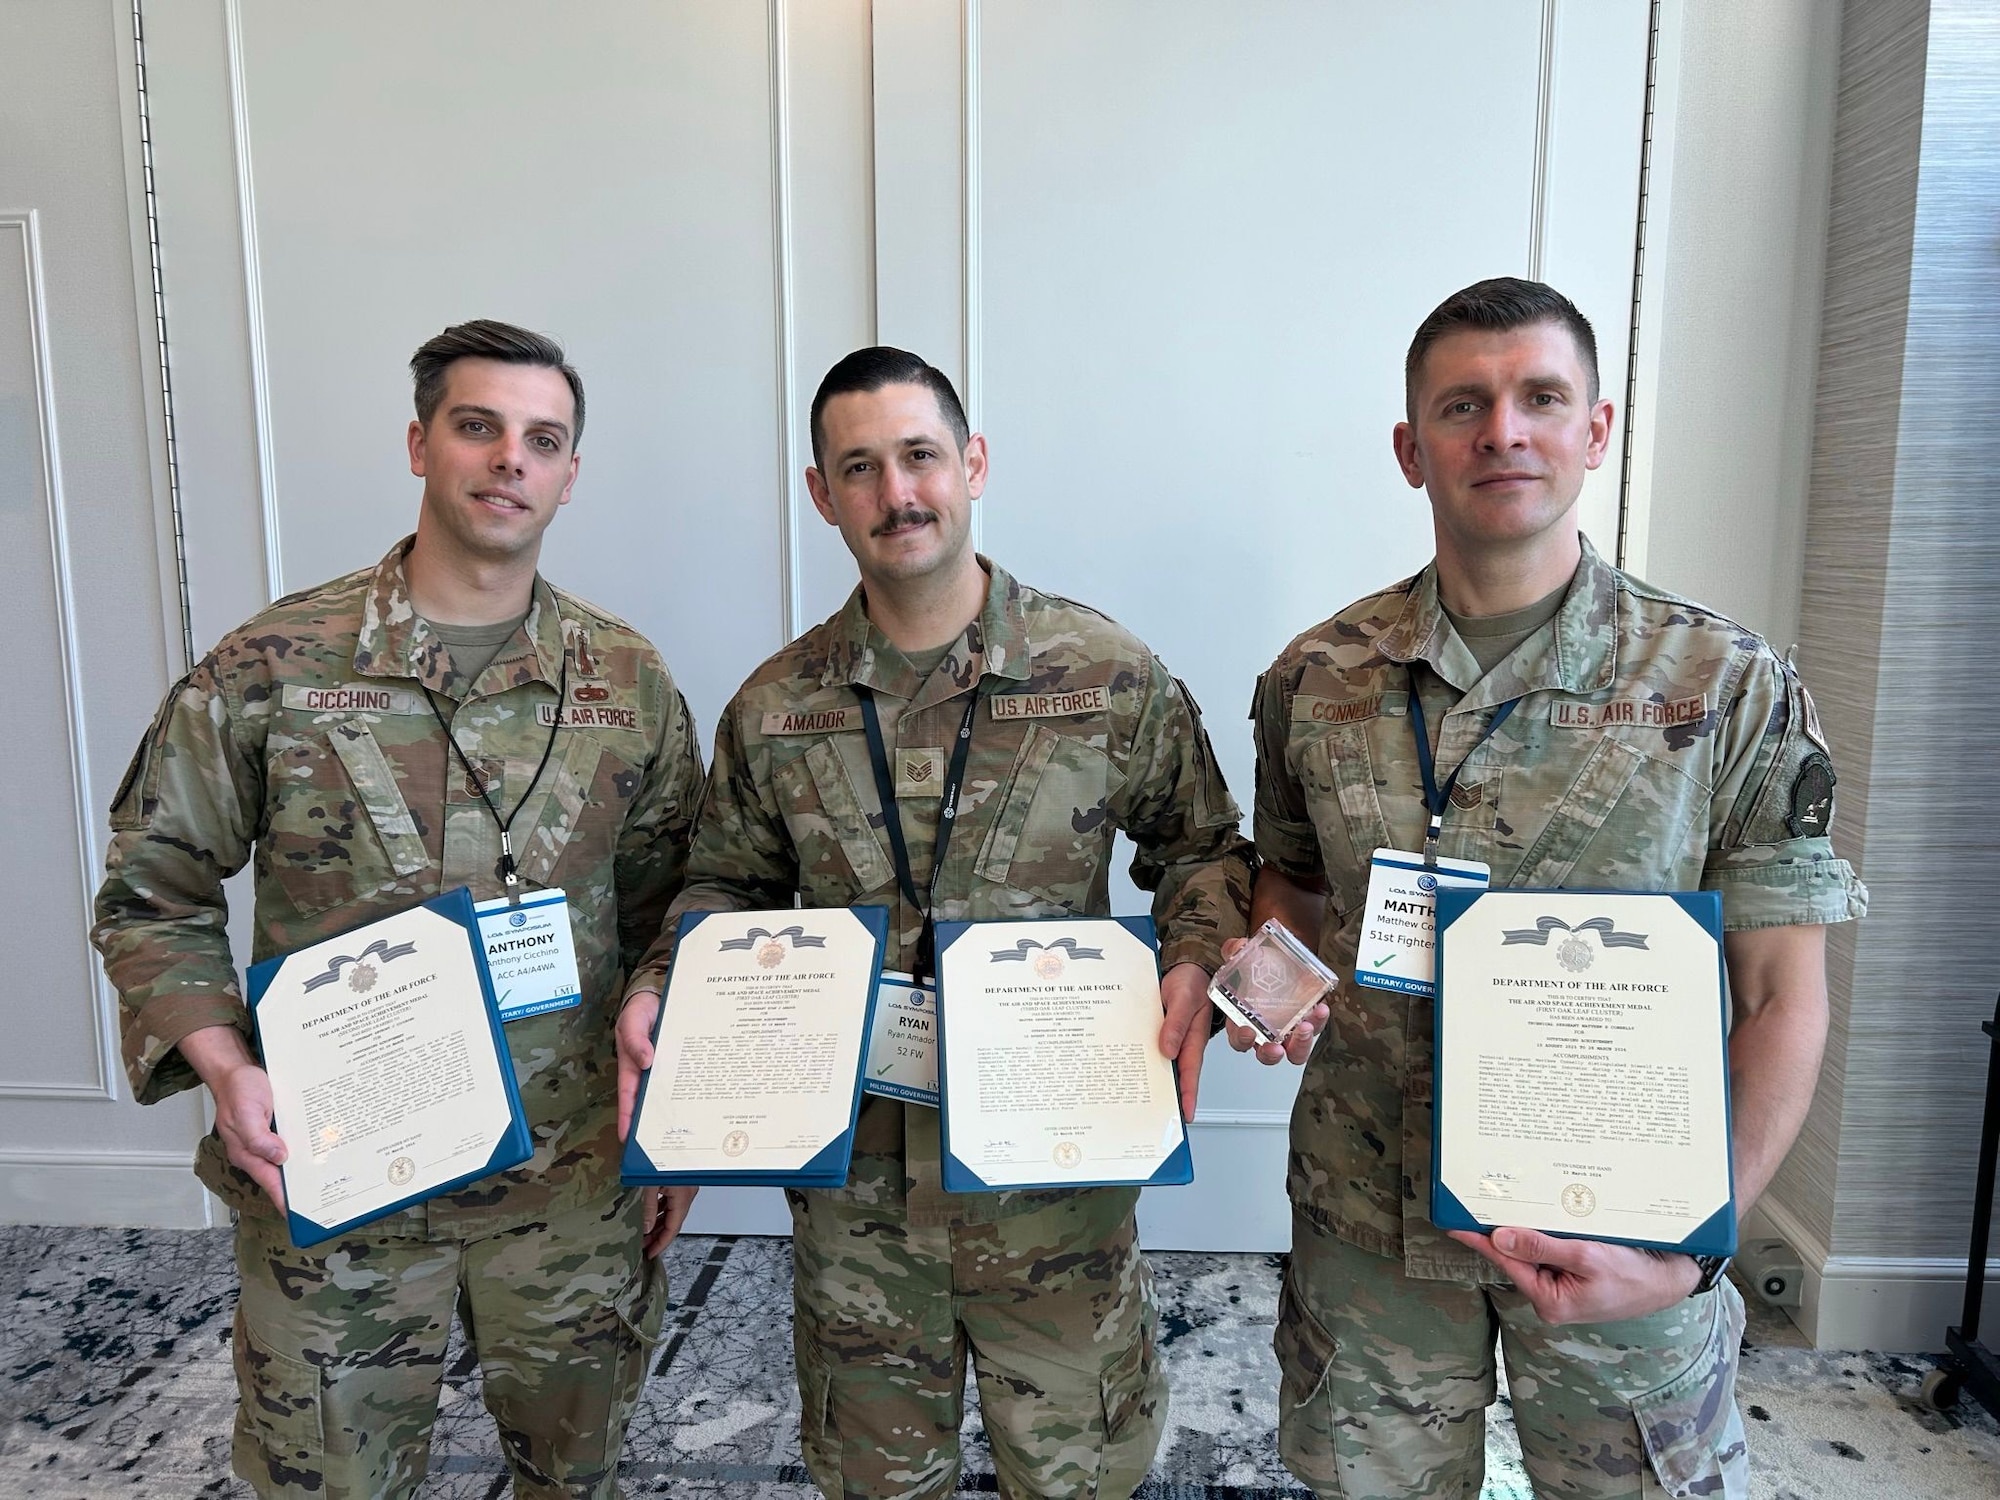 Three men in military uniforms pose for a photo while holding certificates and a trophy.